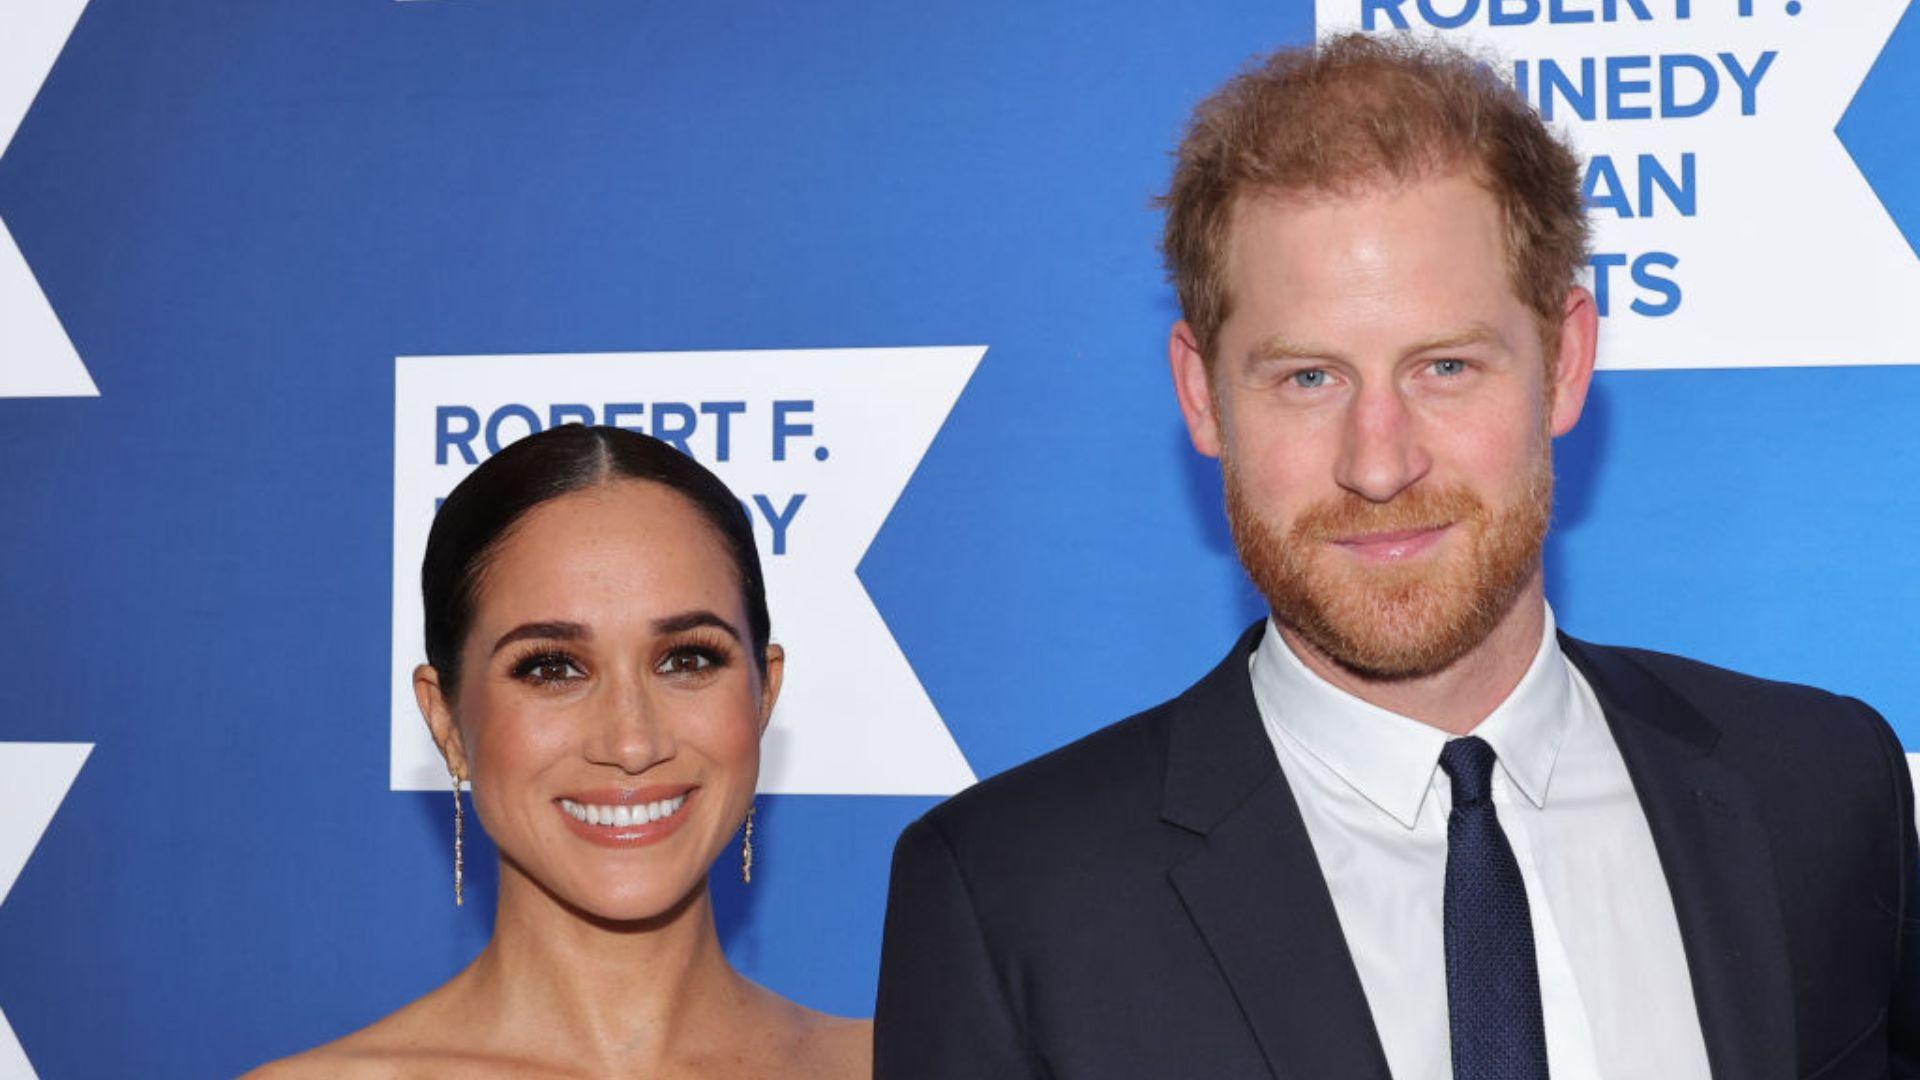 Prince Harry and Meghan Markle, the Duke and Duchess of Sussex, are smiling and posing together for a photo at a formal event. Meghan is wearing a sleeveless dress with her hair neatly tied back, complemented by long earrings, while Prince Harry is in a dark suit with a light shirt and a dark blue tie